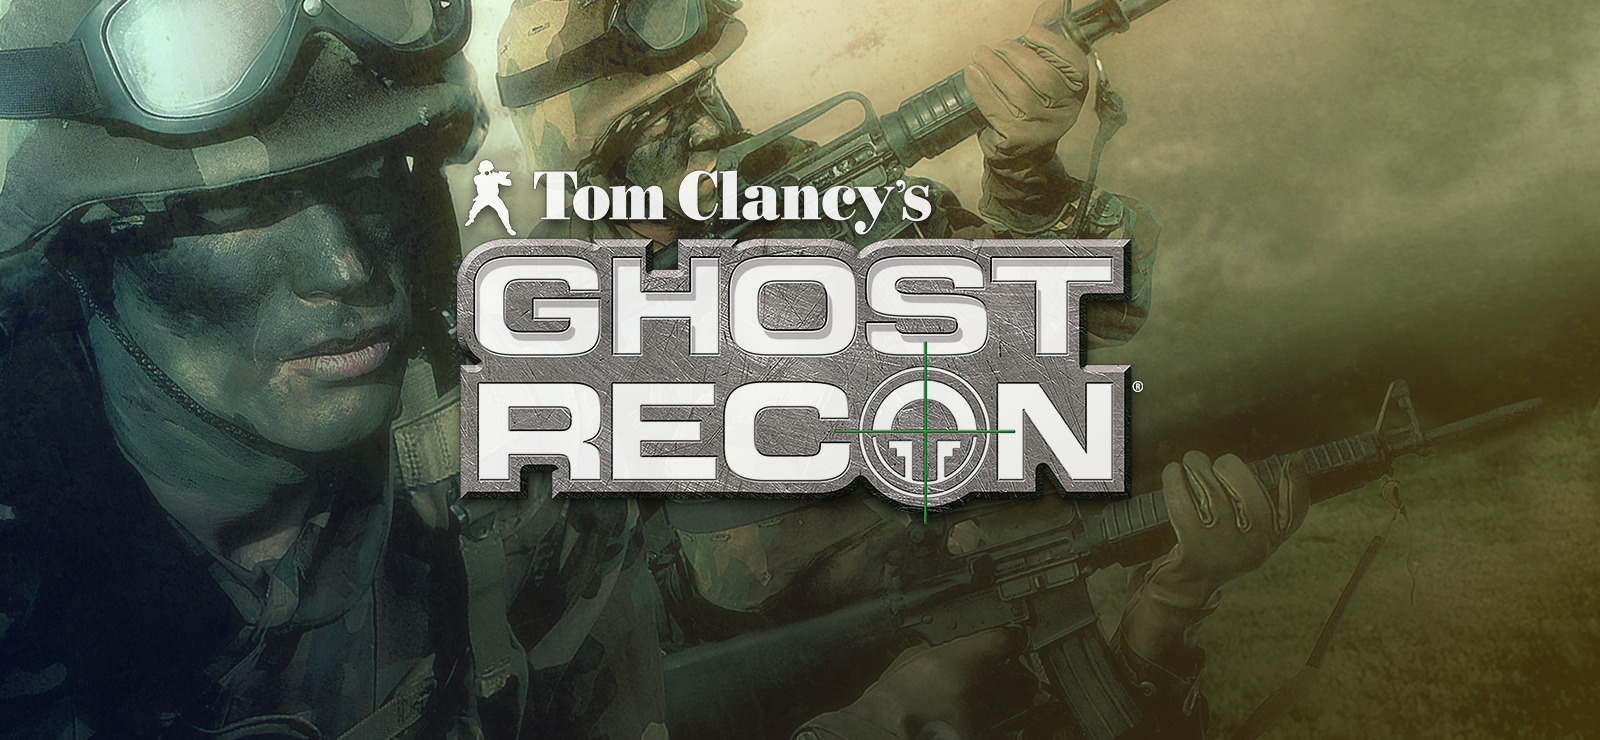 why does tom clancy